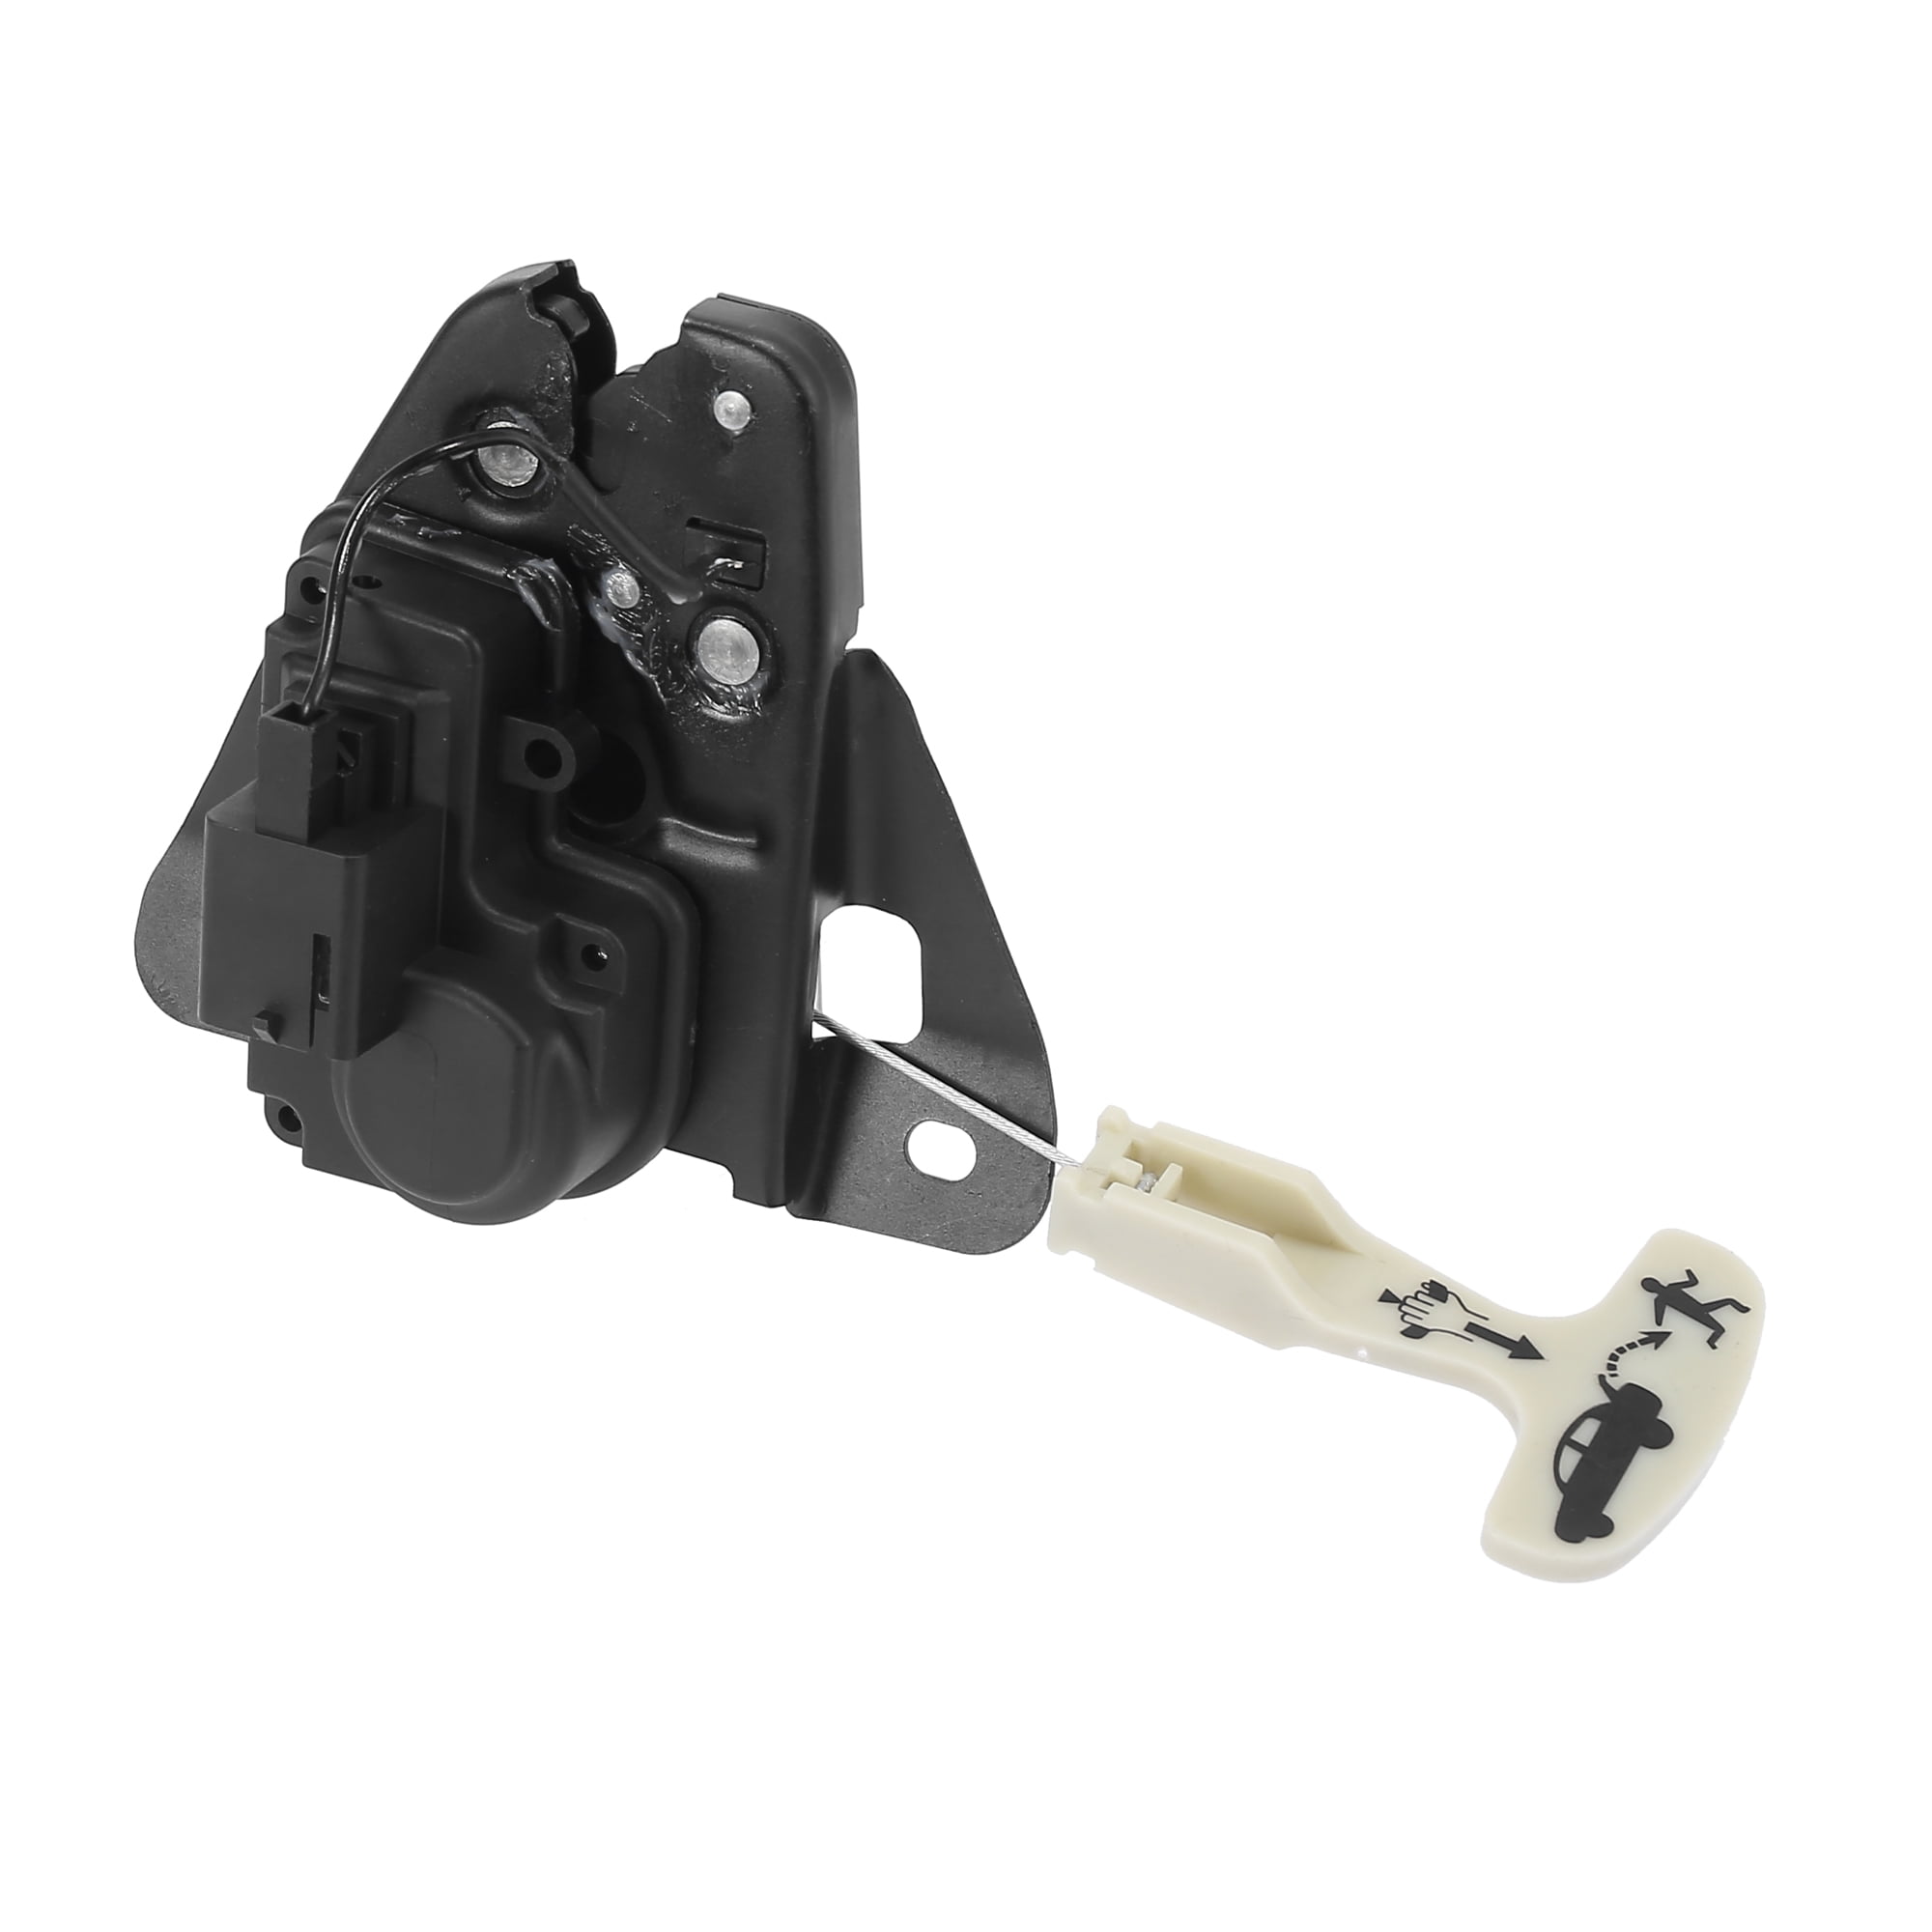 72050 Trunk Lock Actuator/Tailgate Lock Latch Fits for CHRYSLER DODGE Selected Models Replaces 5056244AA 931-714 5056244AB 5056244AC